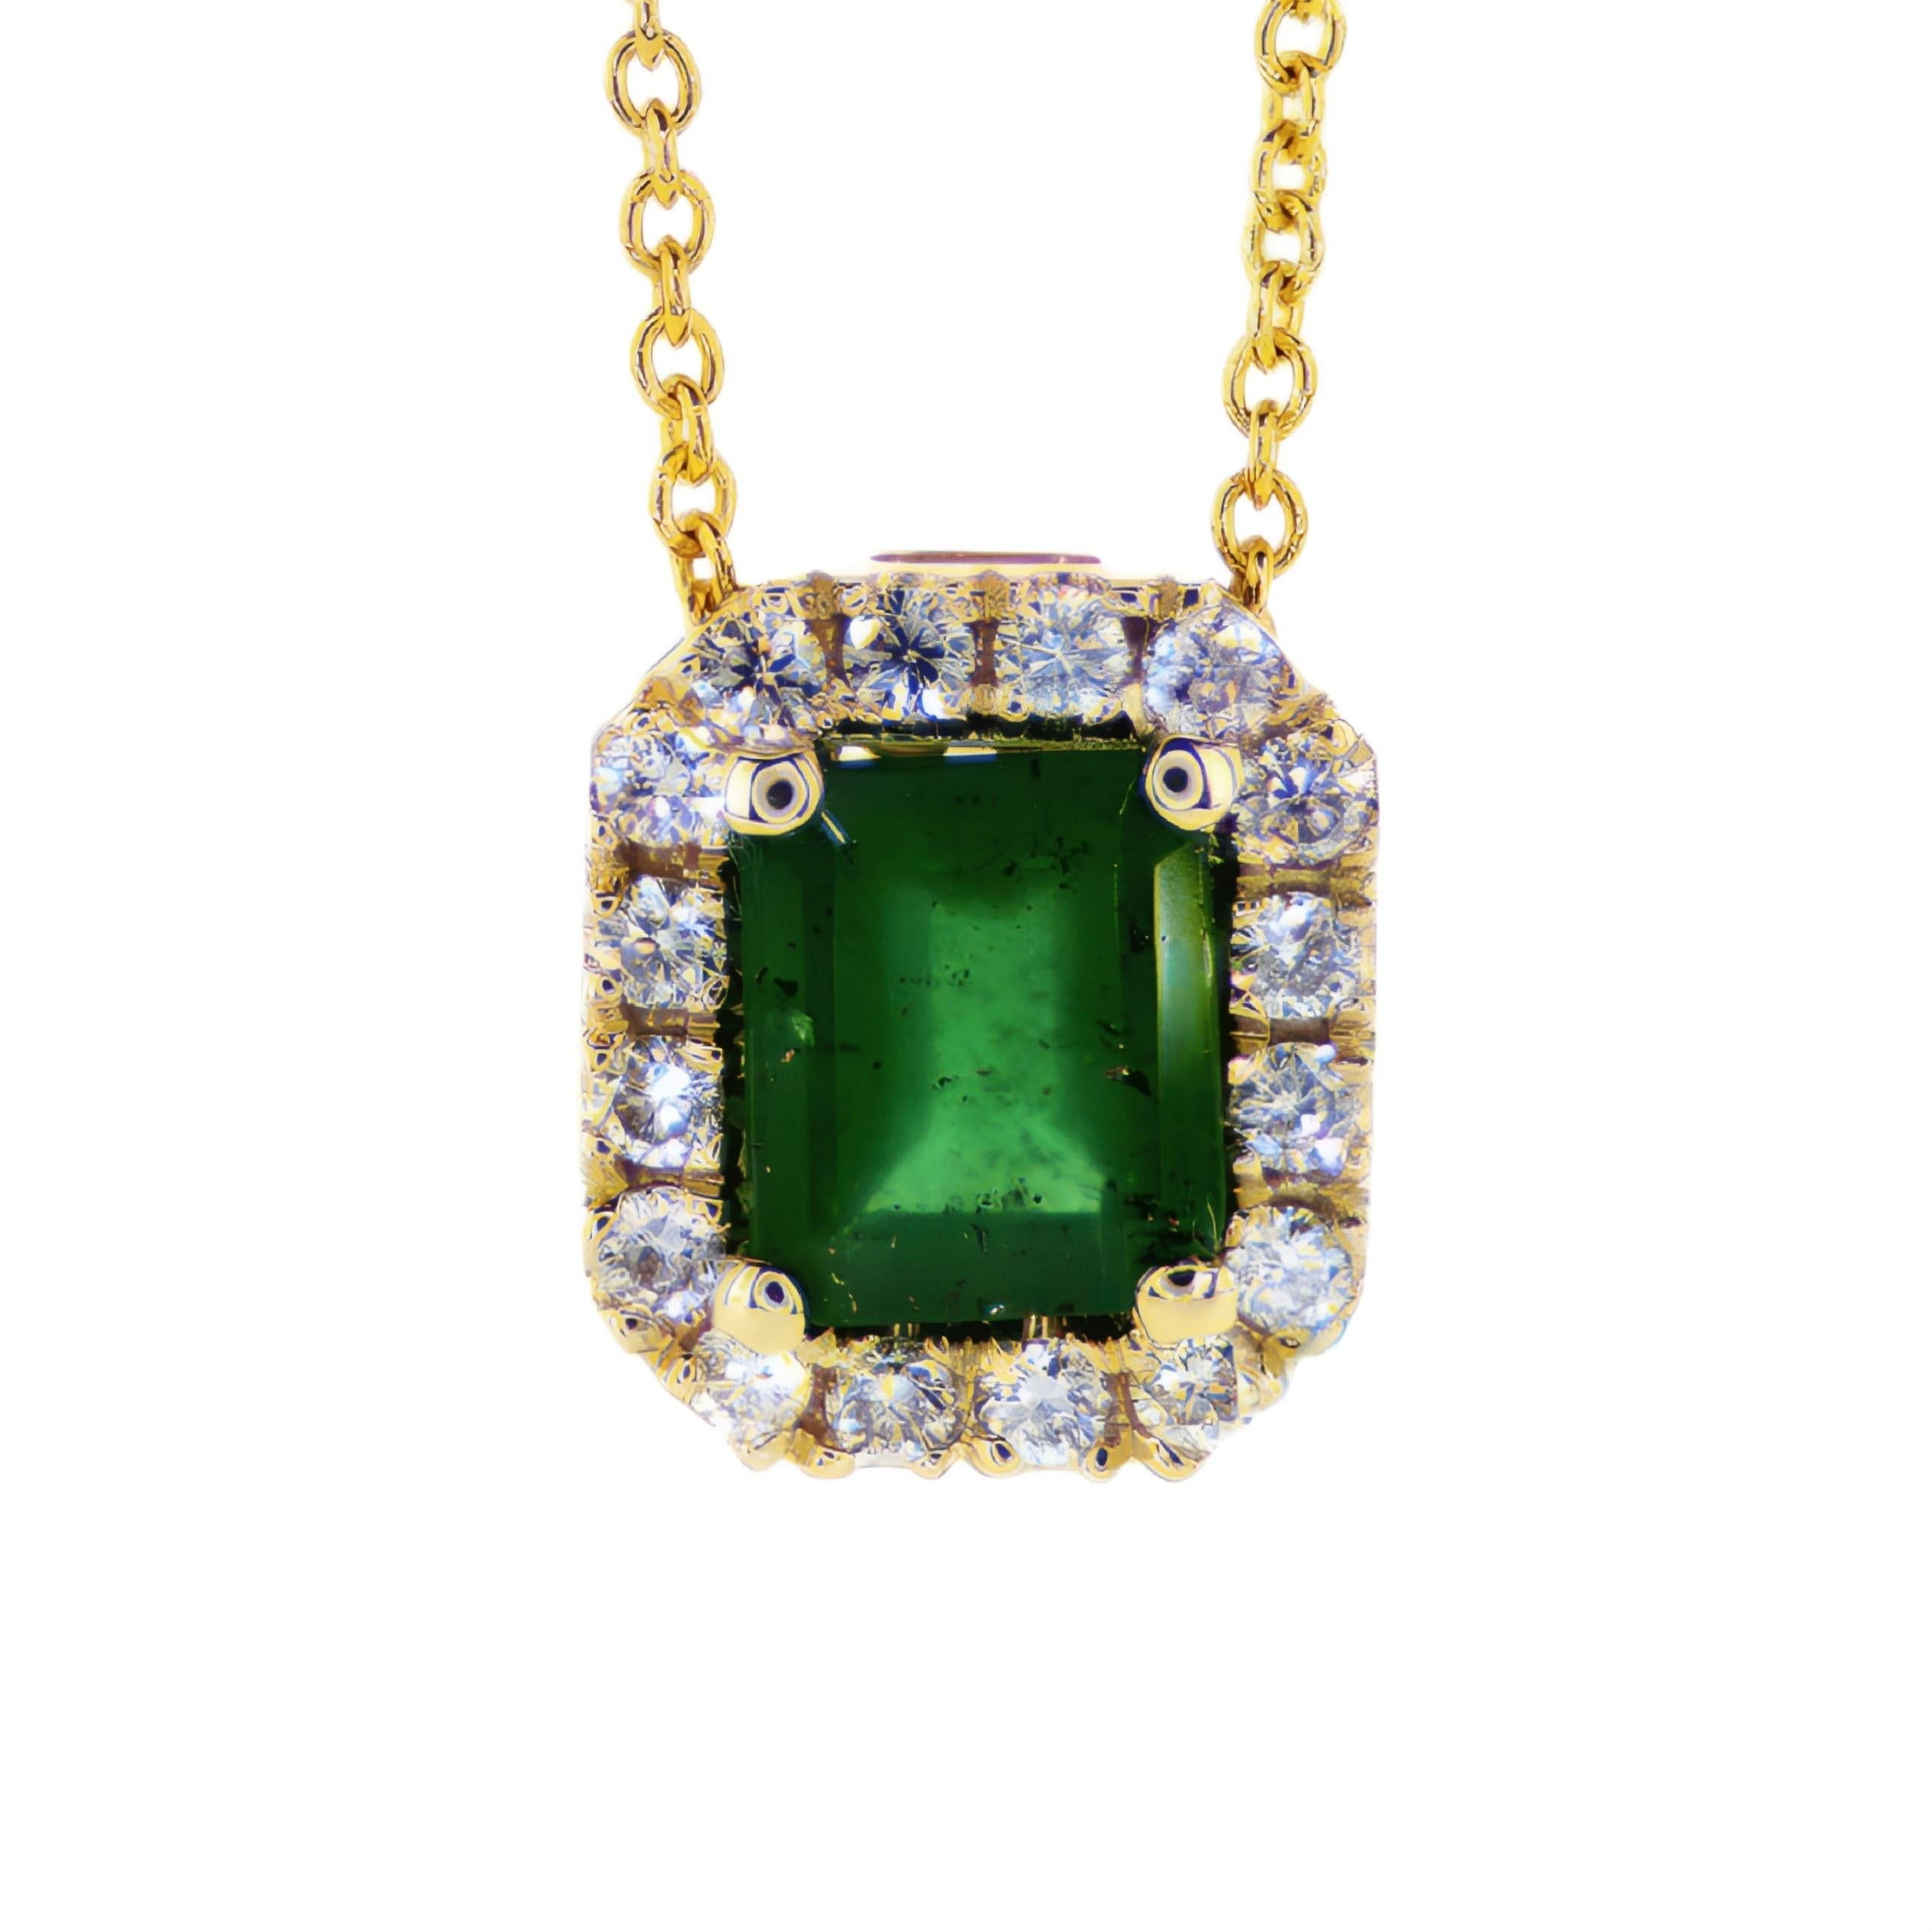 0.55CT Emerald Shape Emerald and Diamonds Halo 14K Yellow Gold Pendant and Necklace

Product Description:

Presenting our Emerald And diamonds Halo Necklace, a remarkable expression of timeless elegance and artistic craftsmanship. This pendant and